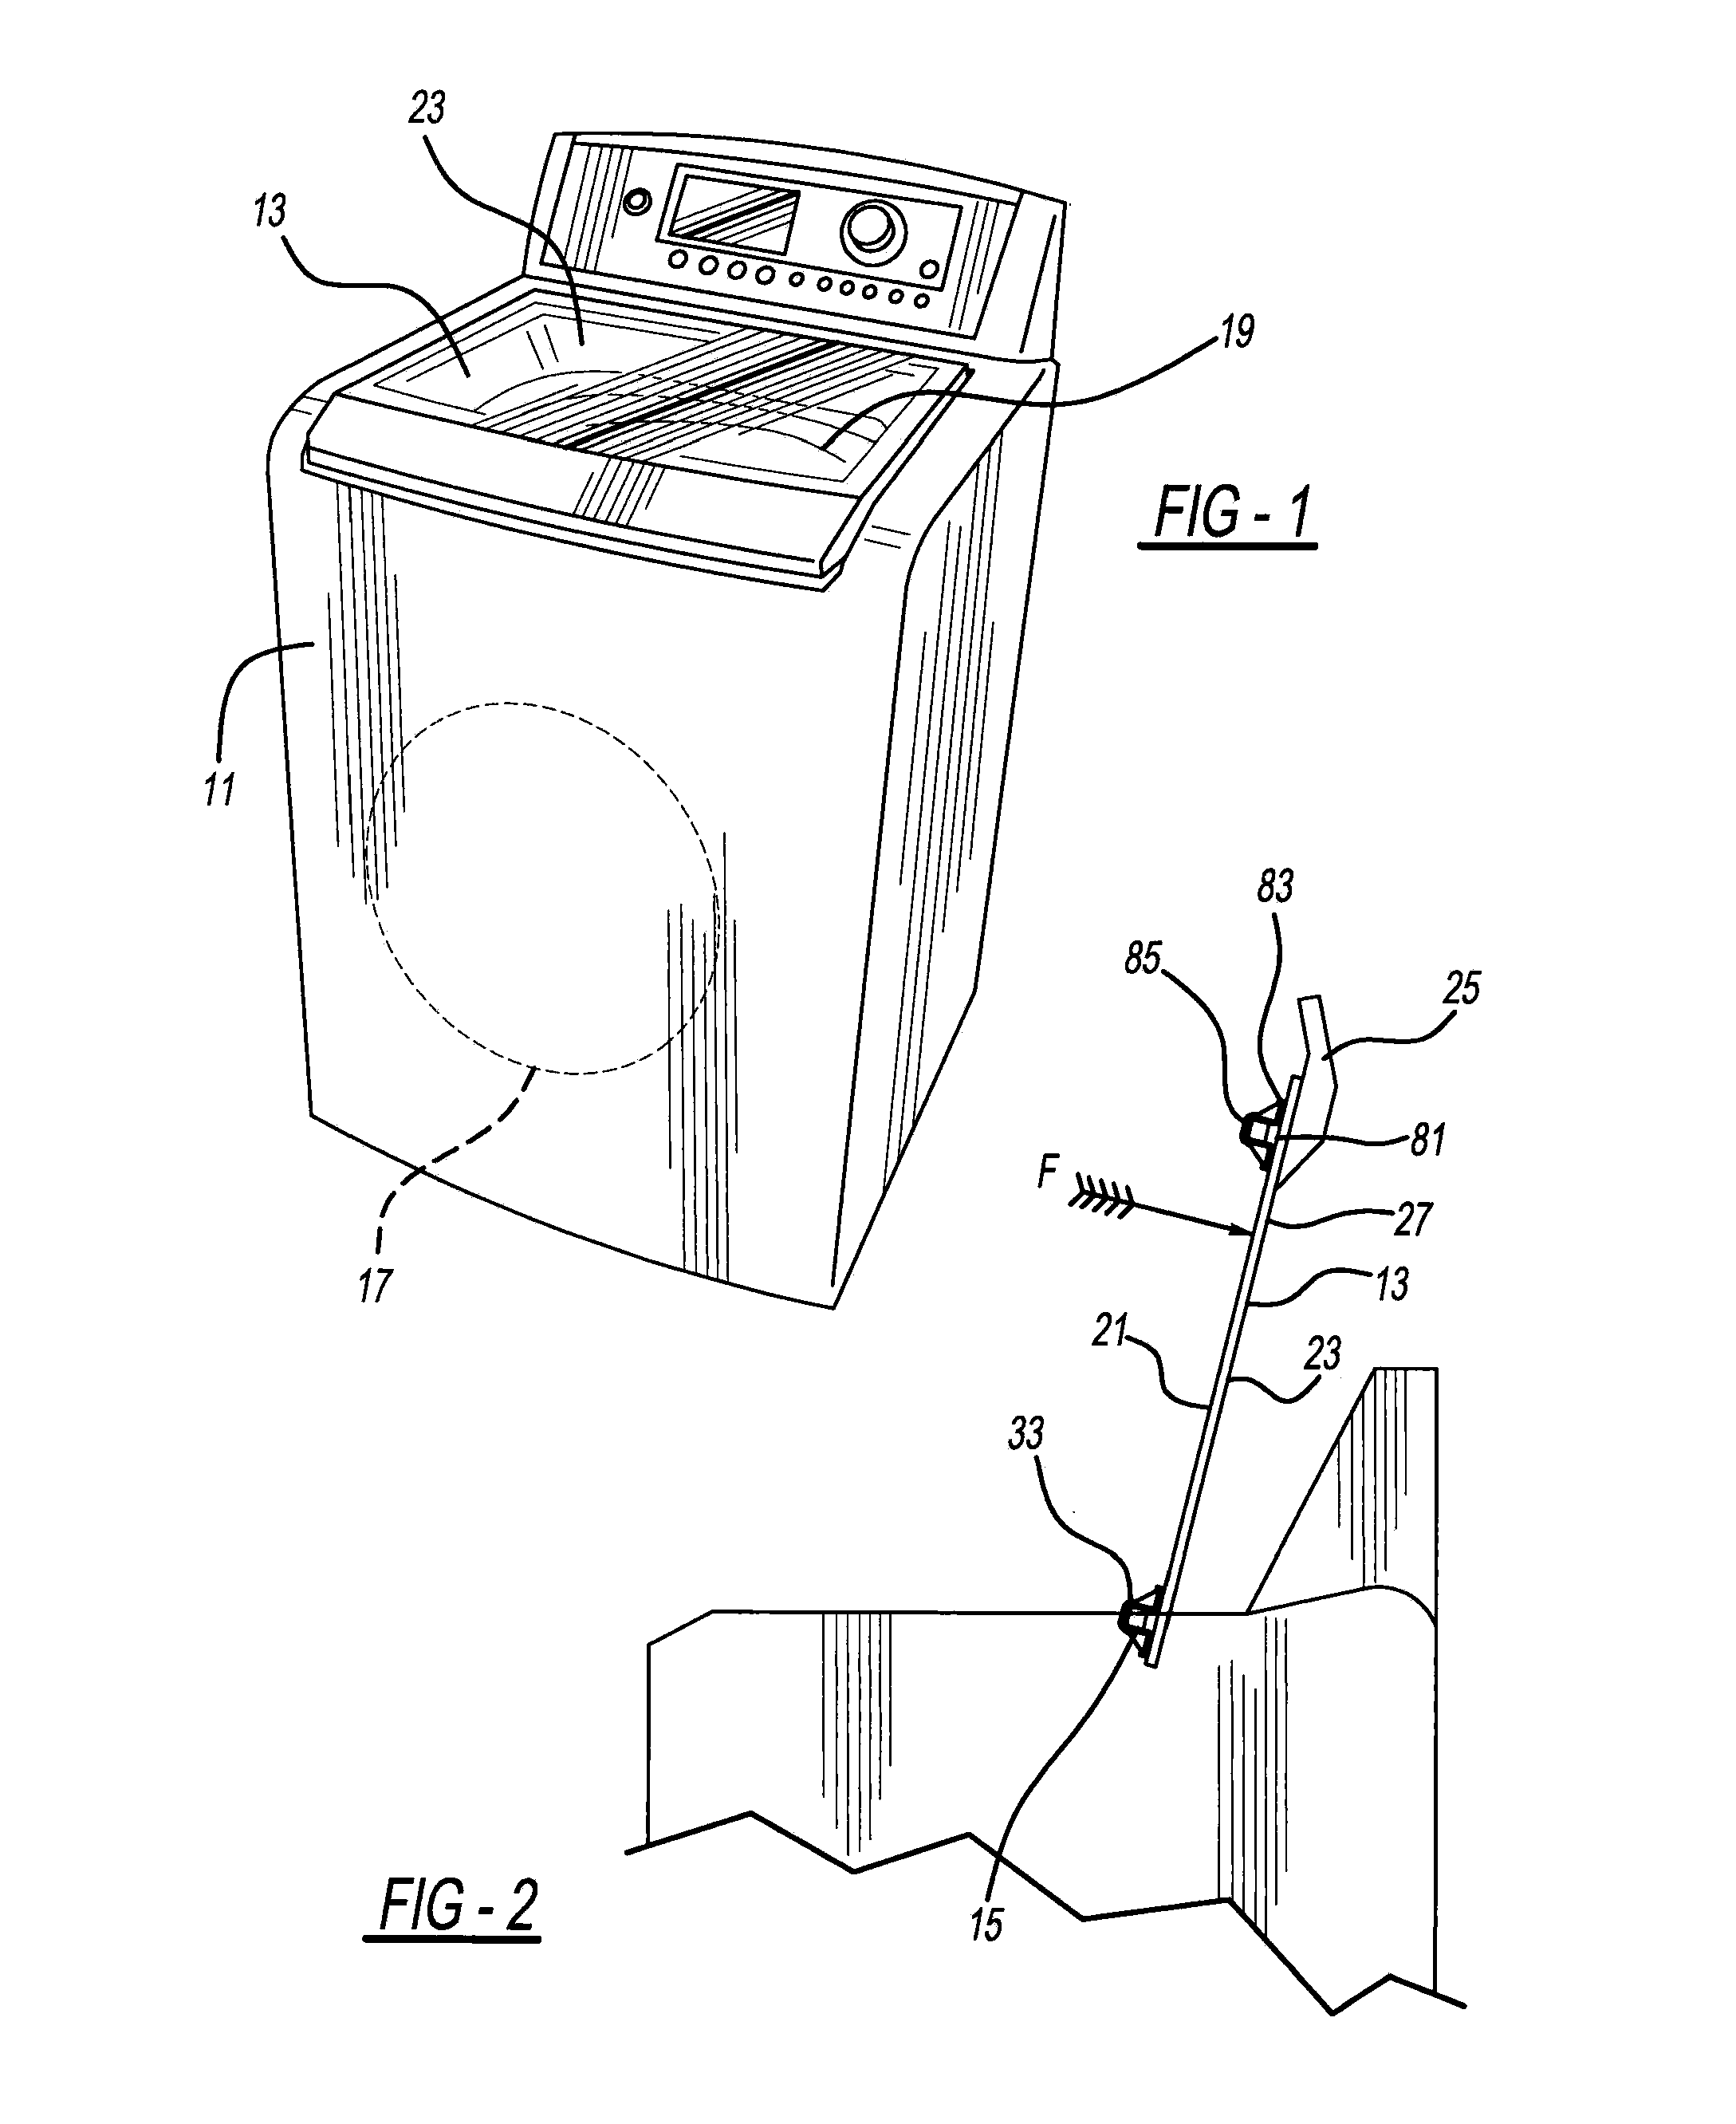 Appliance apparatus including a bonded bracket